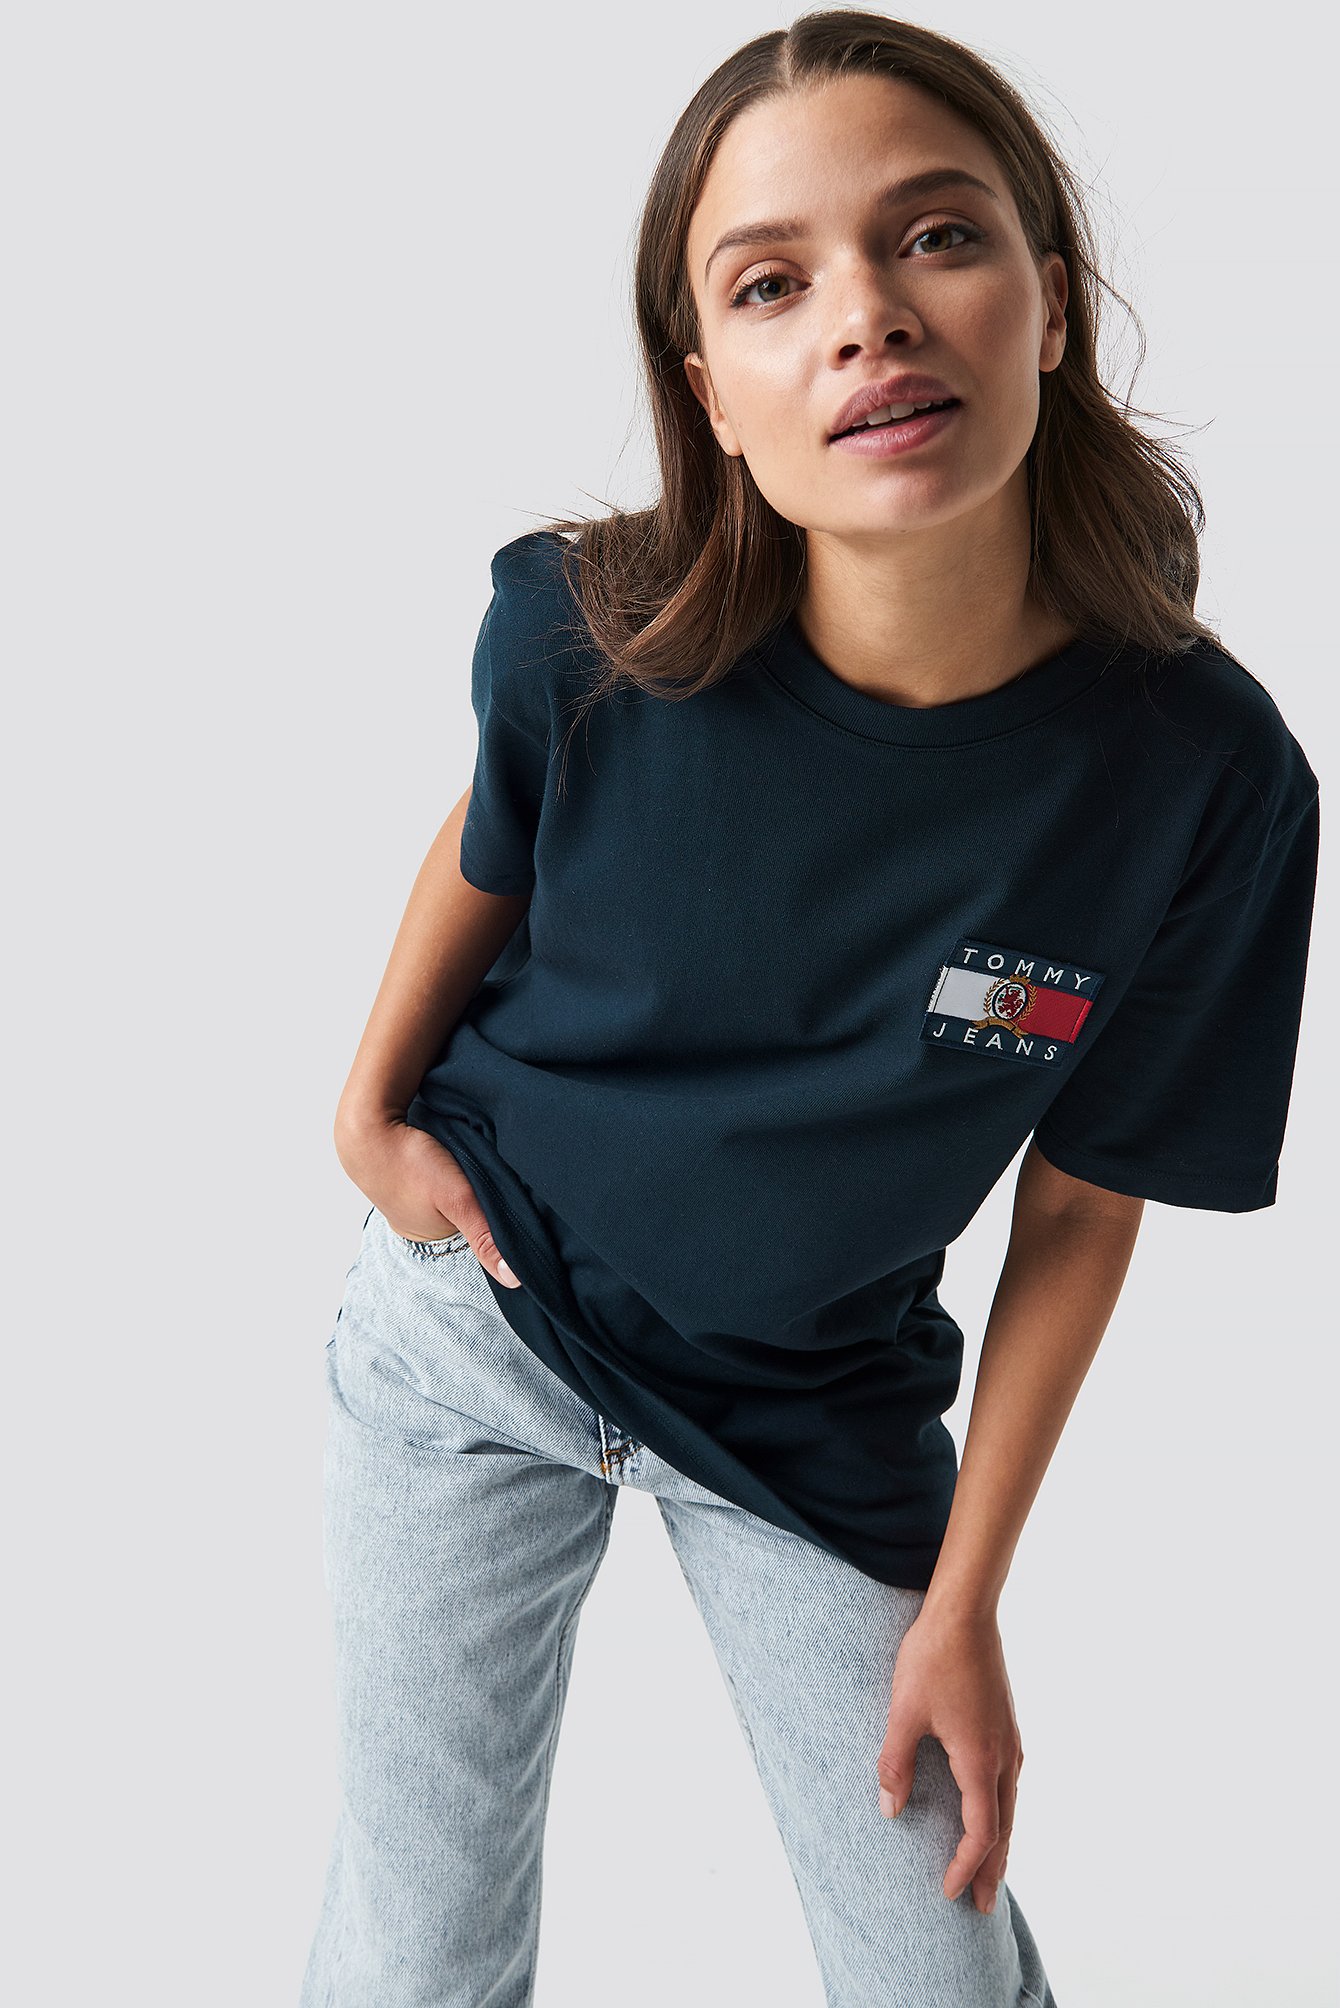 crest flag tee tommy